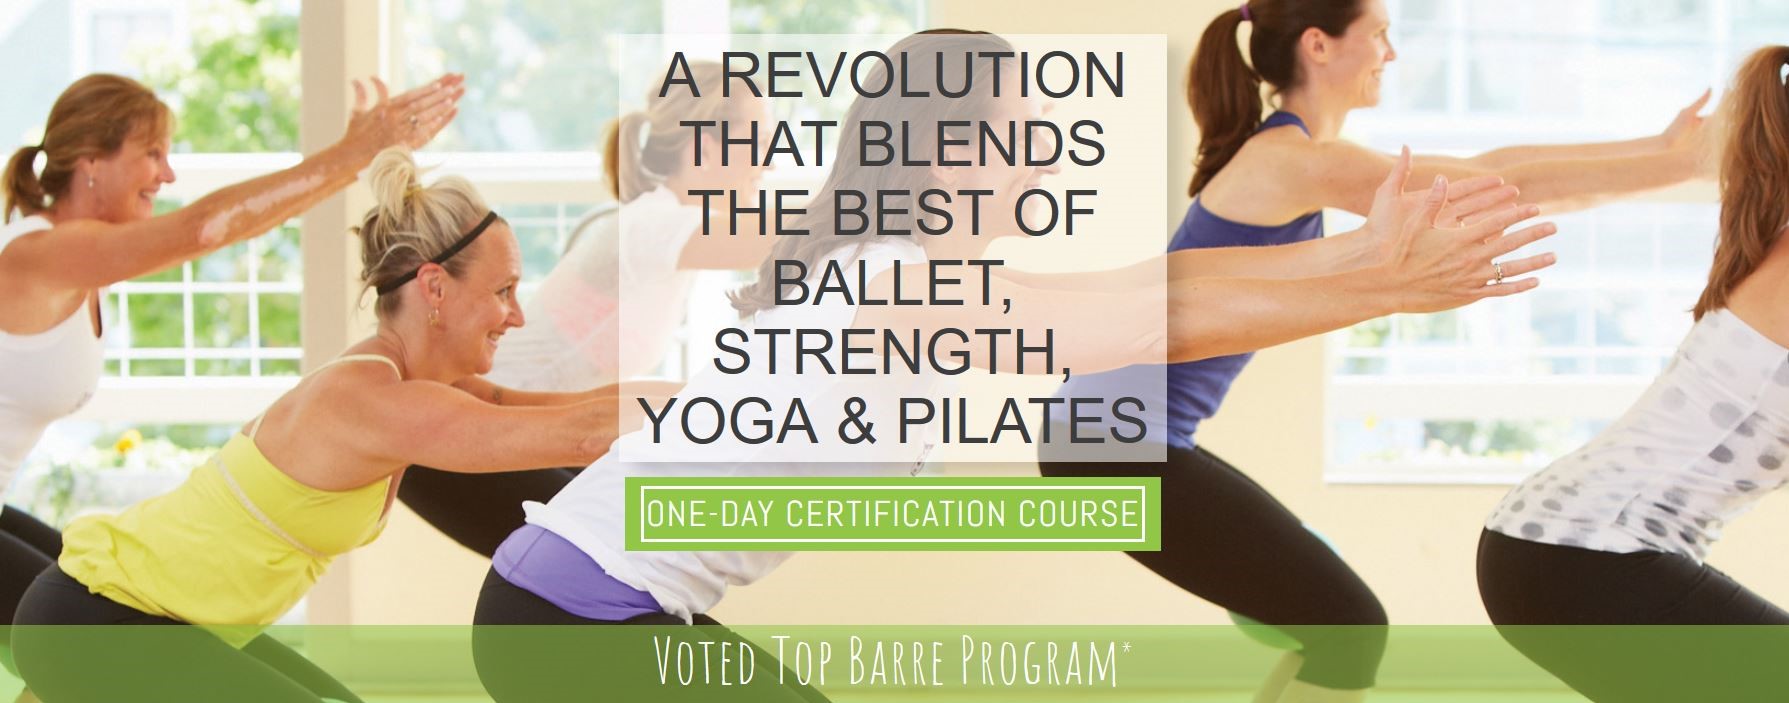 Barre Above Certification